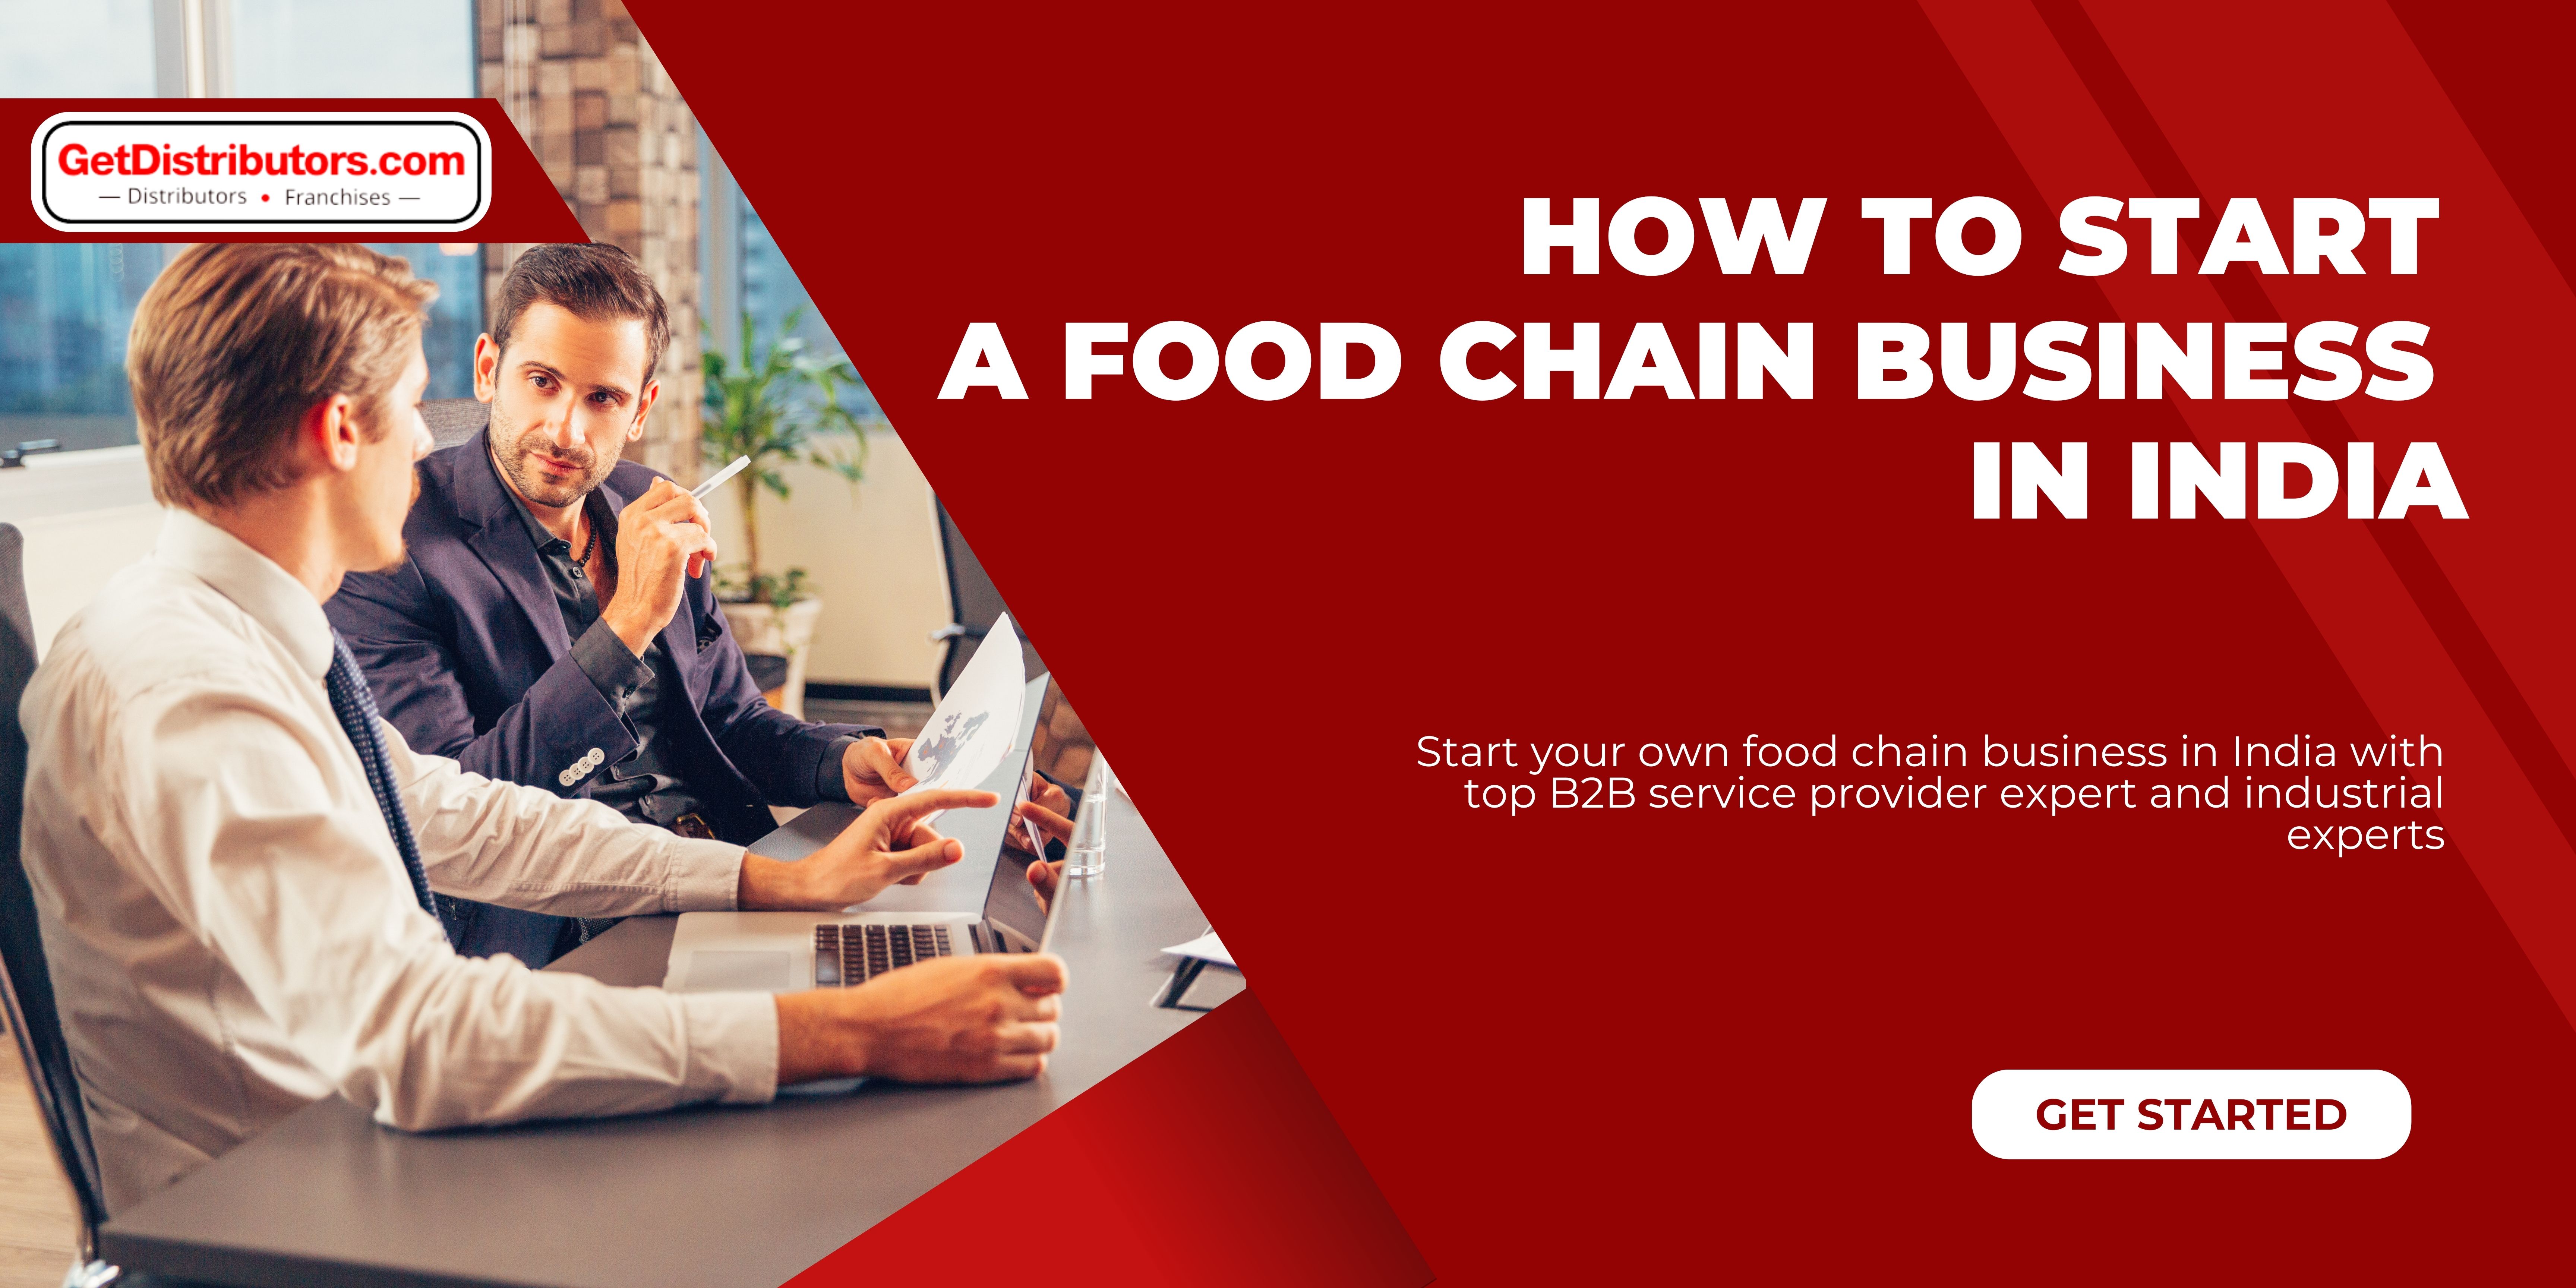 How To Start A Food Chain Business In India (1)